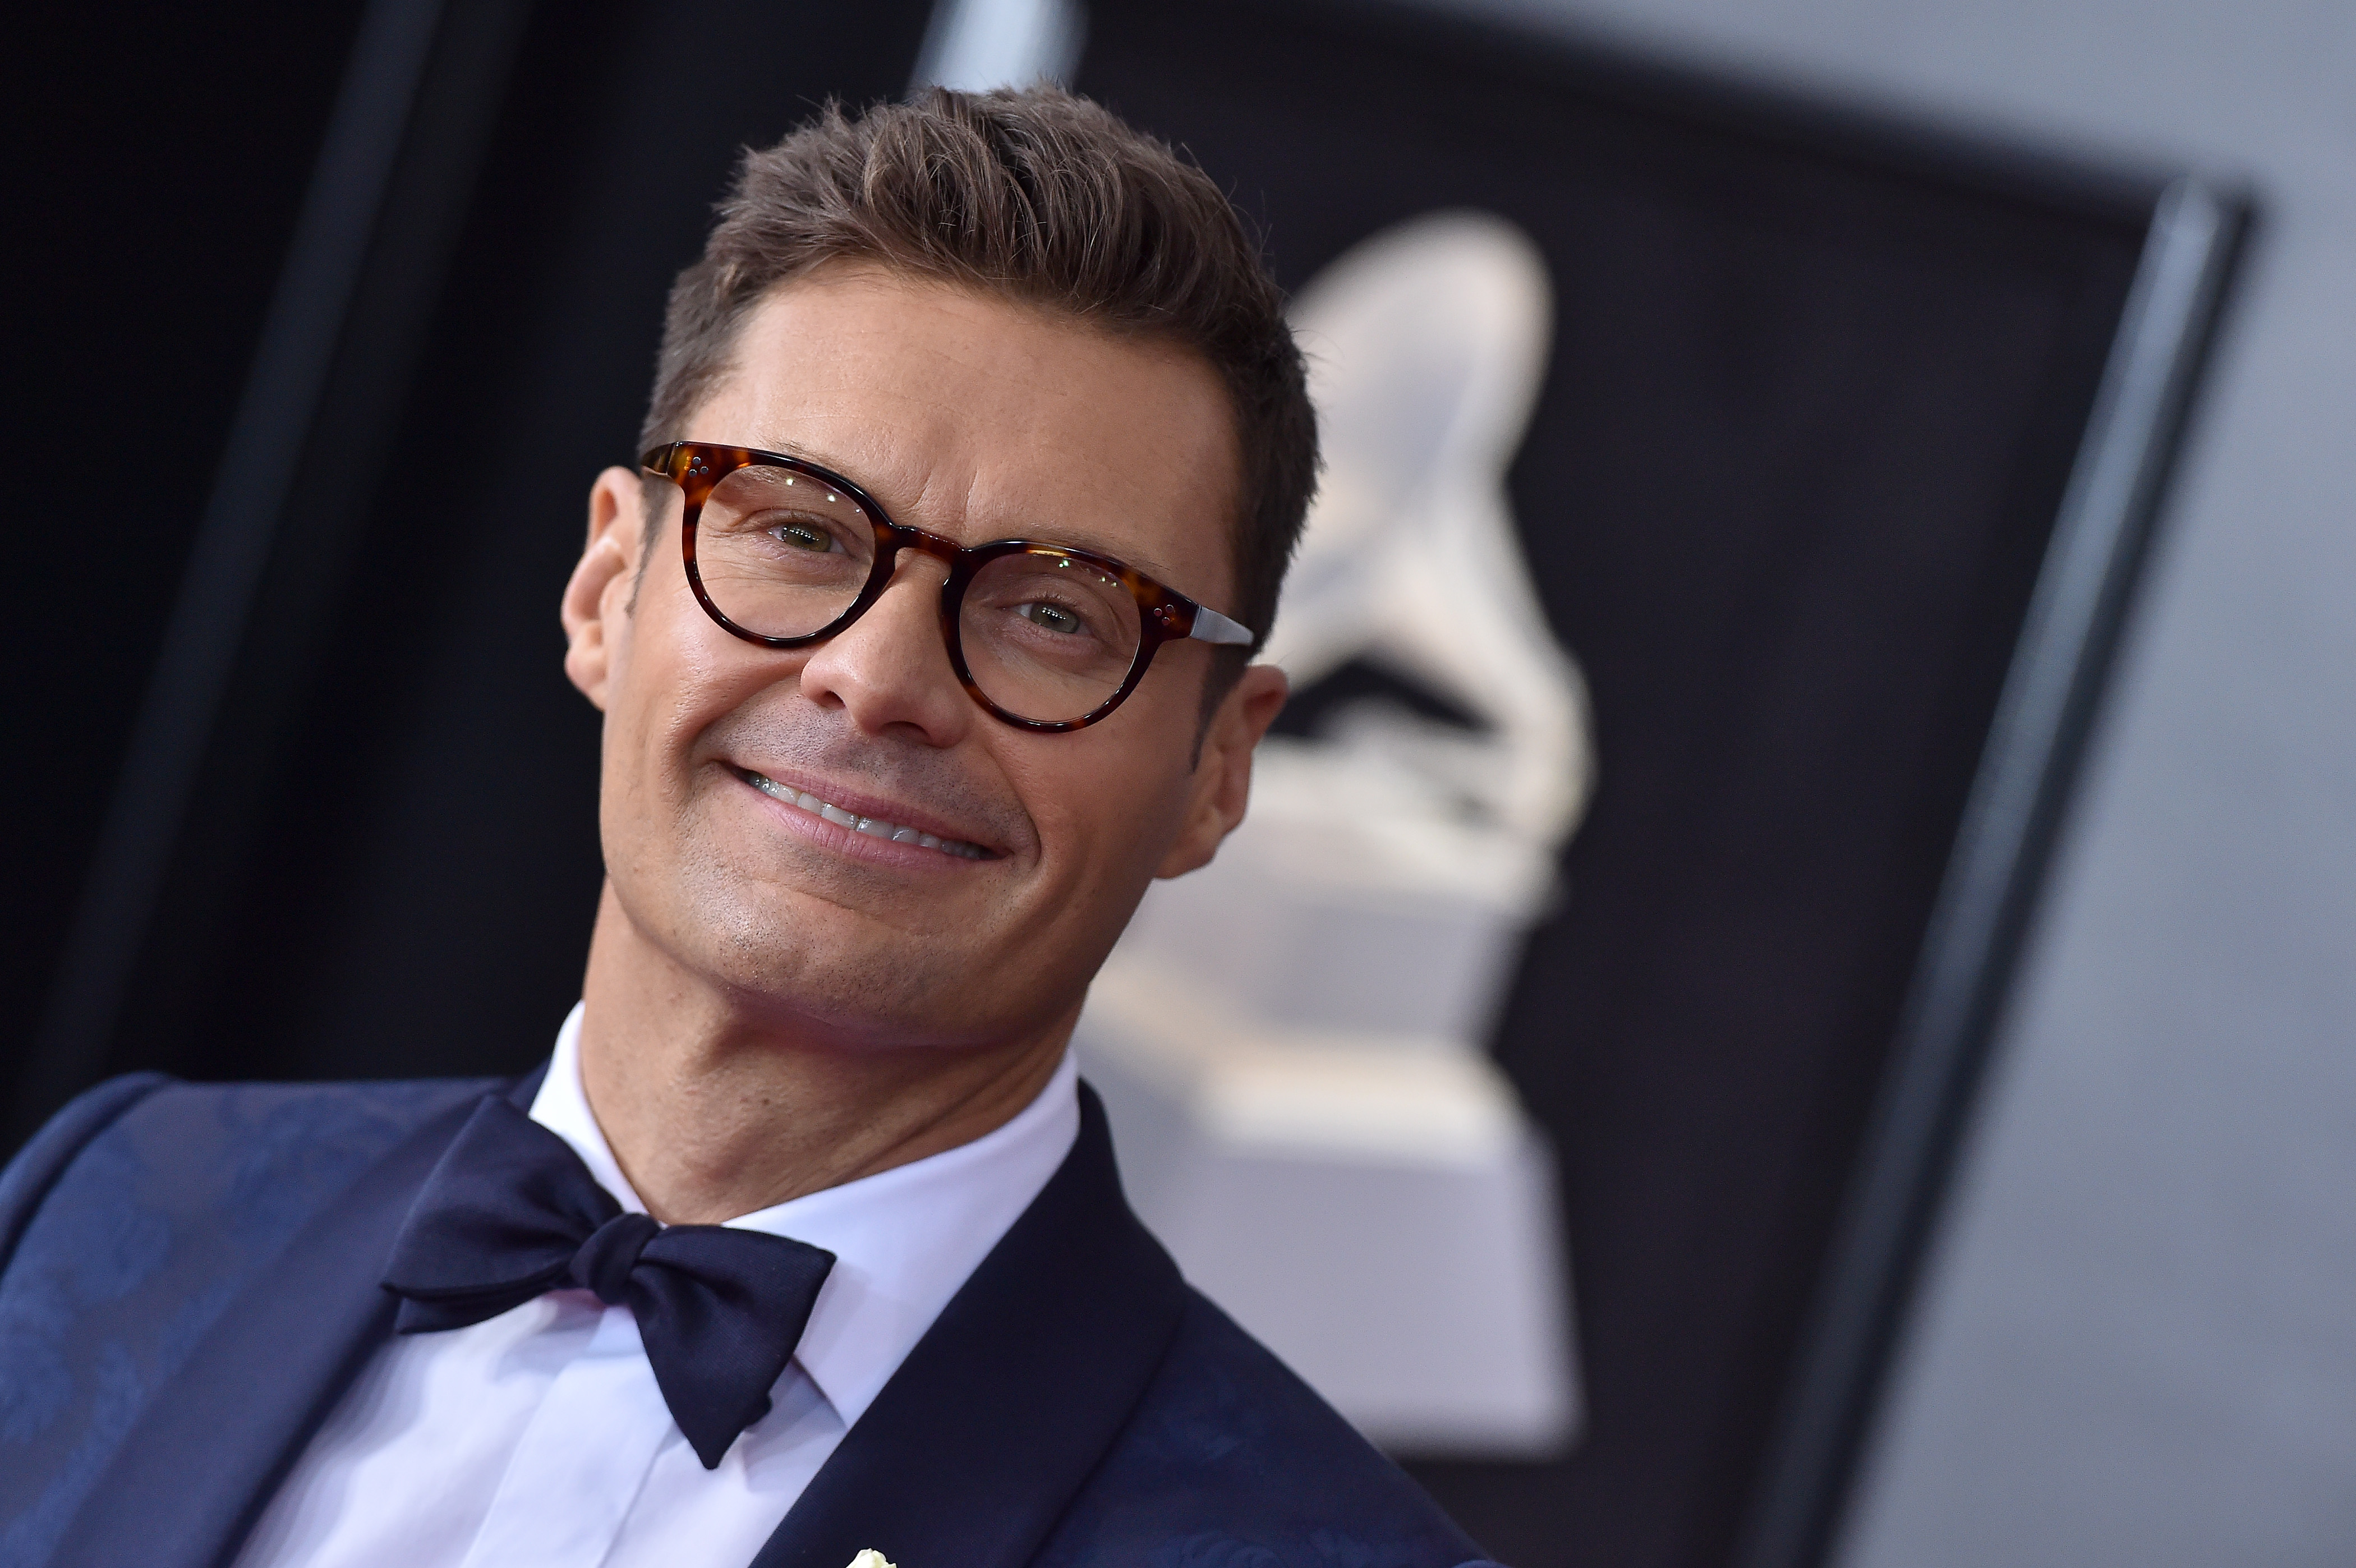 NEW YORK, NY - JANUARY 28:  TV personality Ryan Seacrest attends the 60th Annual GRAMMY Awards at Madison Square Garden on January 28, 2018 in New York City.  (Photo by Axelle/Bauer-Griffin/FilmMagic) (Axelle/Bauer-Griffin&mdash;FilmMagic)